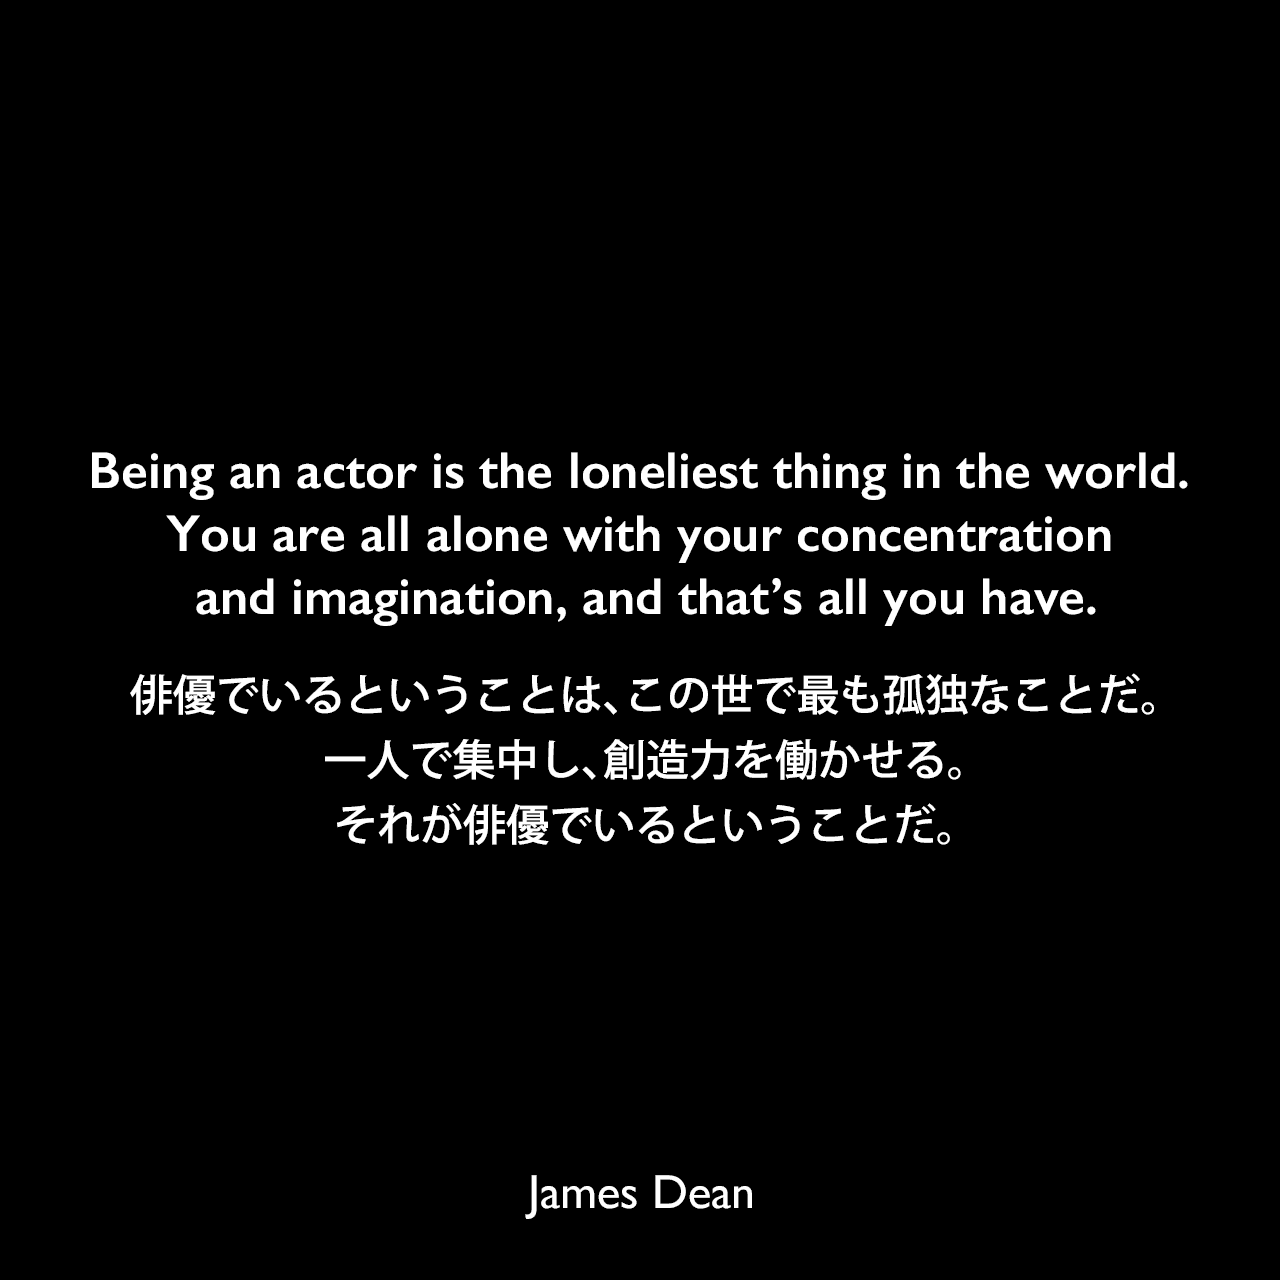 Being an actor is the loneliest thing in the world. You are all alone with your concentration and imagination, and that’s all you have.俳優でいるということは、この世で最も孤独なことだ。一人で集中し、創造力を働かせる。それが俳優でいるということだ。James Dean